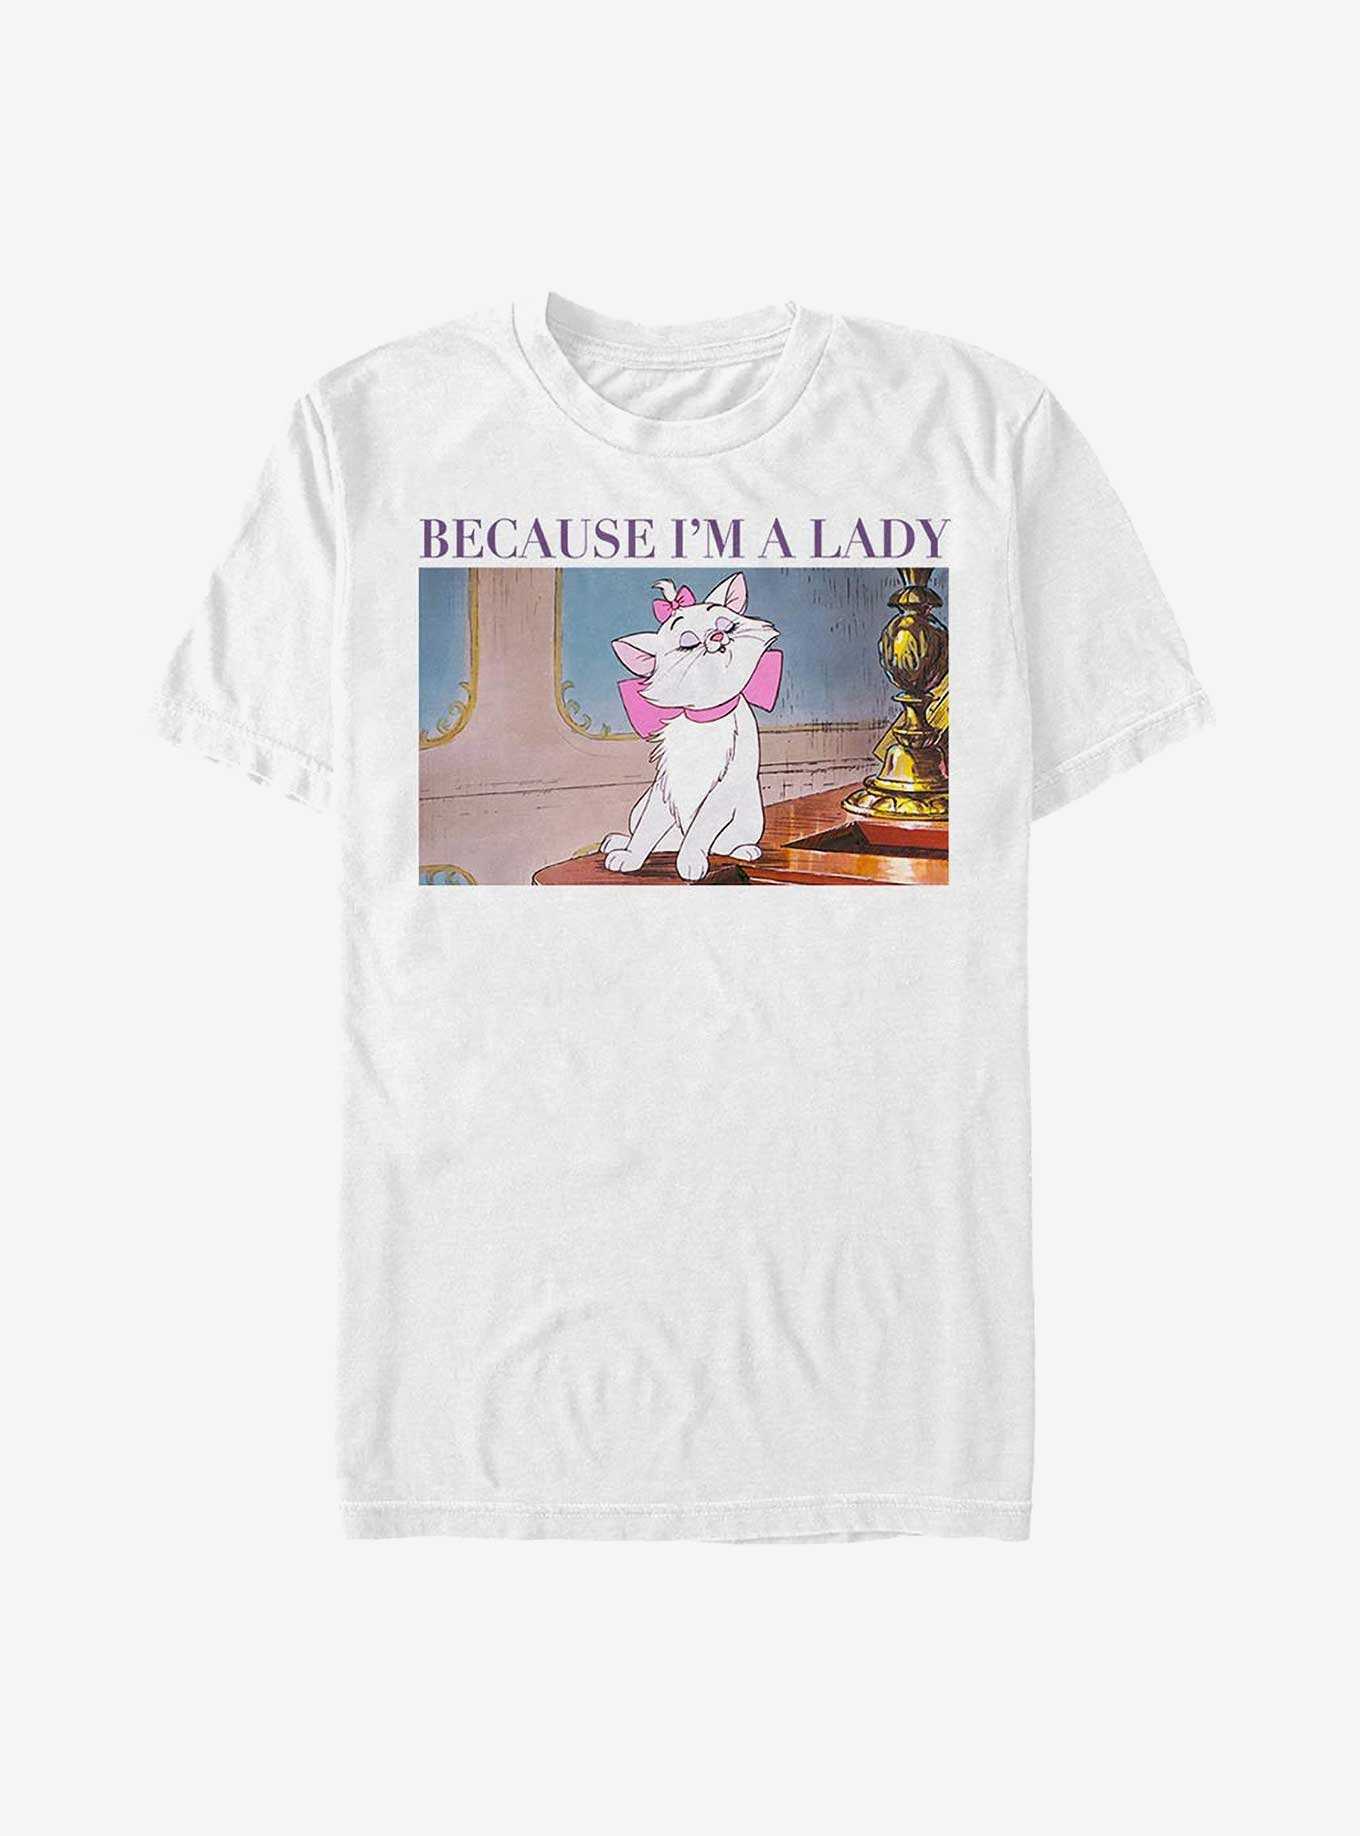 OFFICIAL Aristocats Plushies, Shirts & | Merch Topic Hot